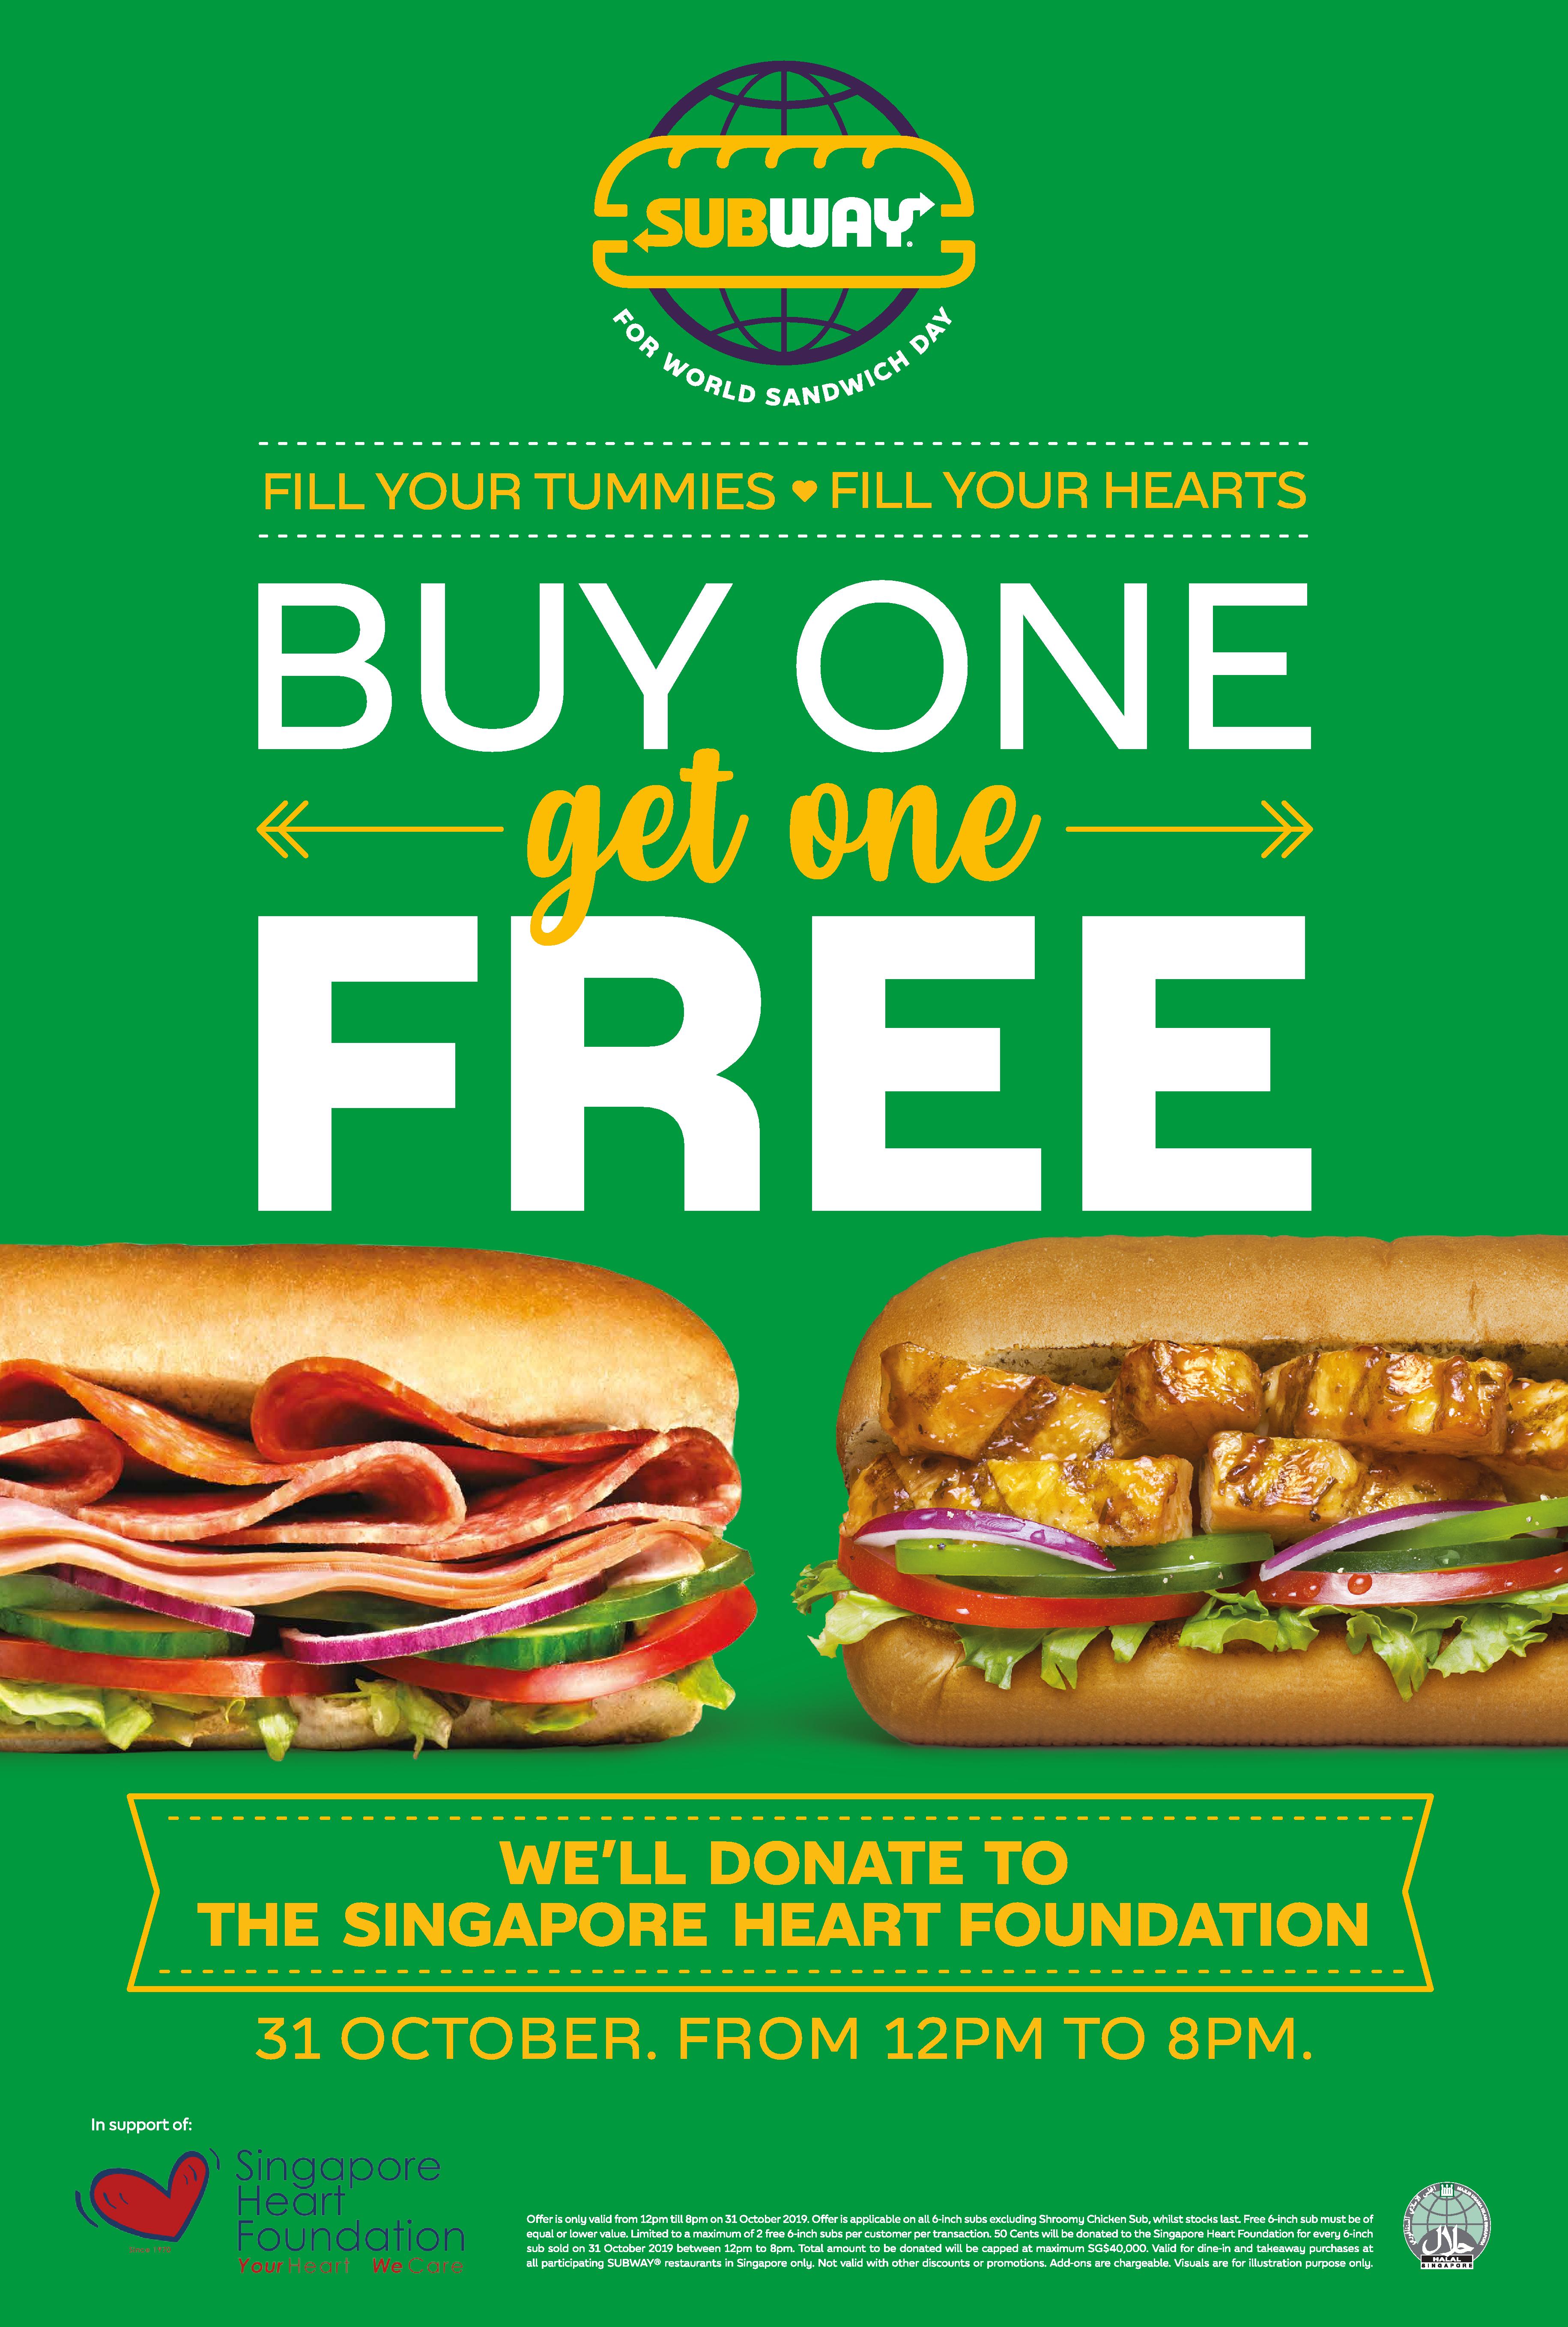 Subway celebrates World Sandwich Day with 1-for-1 subs on 31 Oct 19, donates $0.50 for every sub sold to the Singapore Heart Foundation - 1